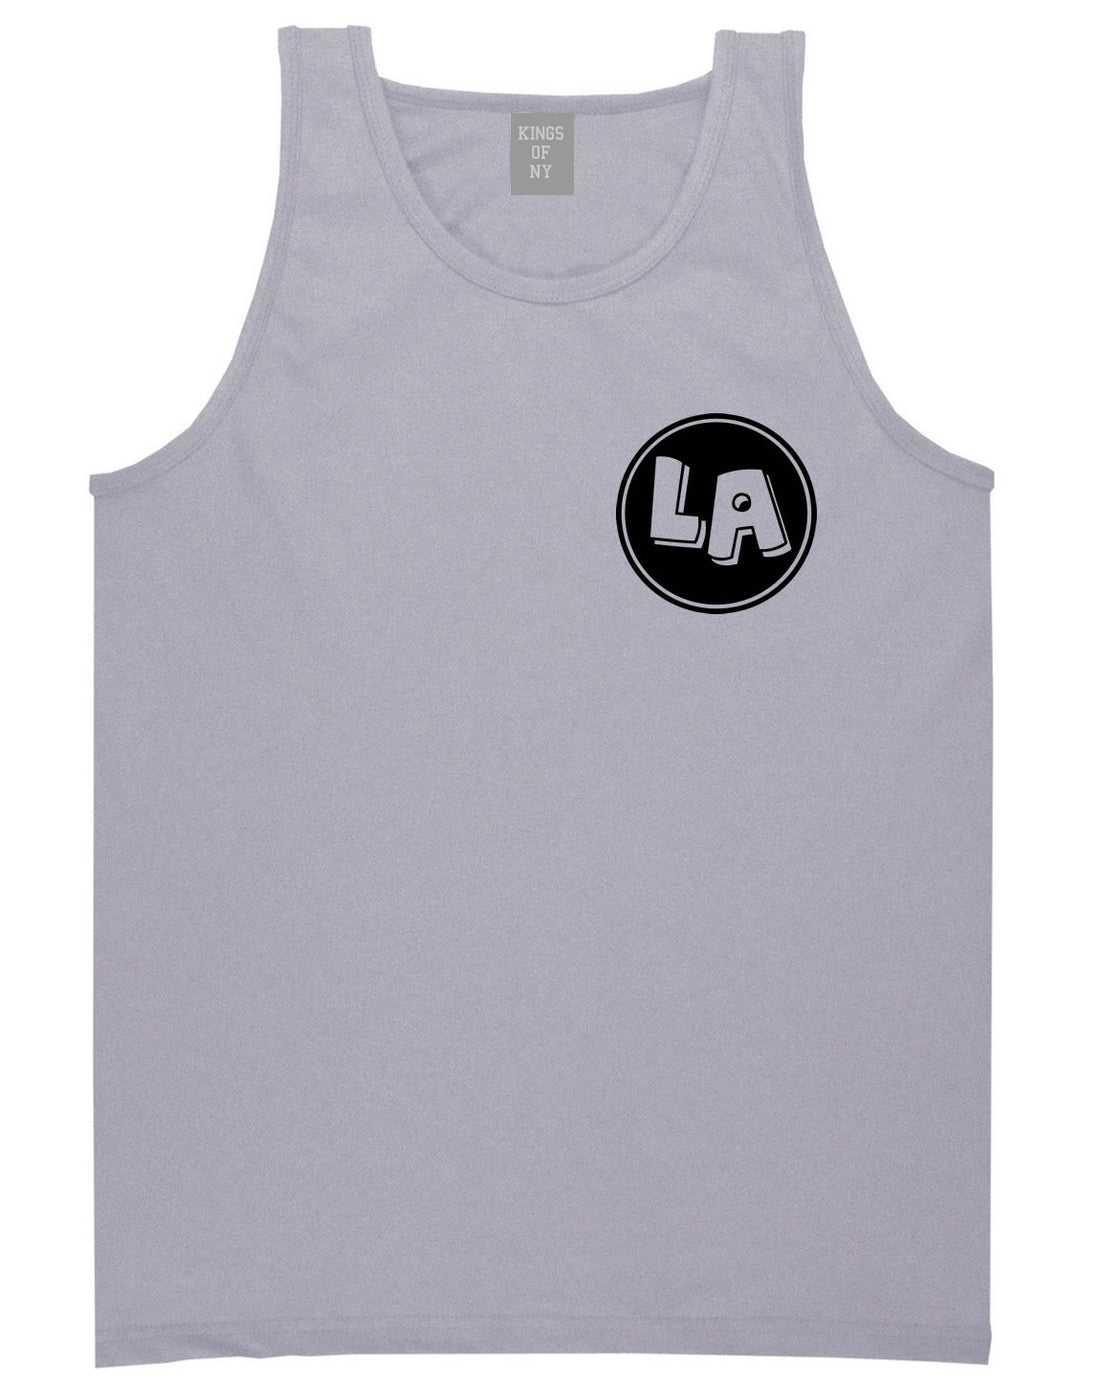 LA Circle Chest Los Angeles Tank Top in Grey By Kings Of NY